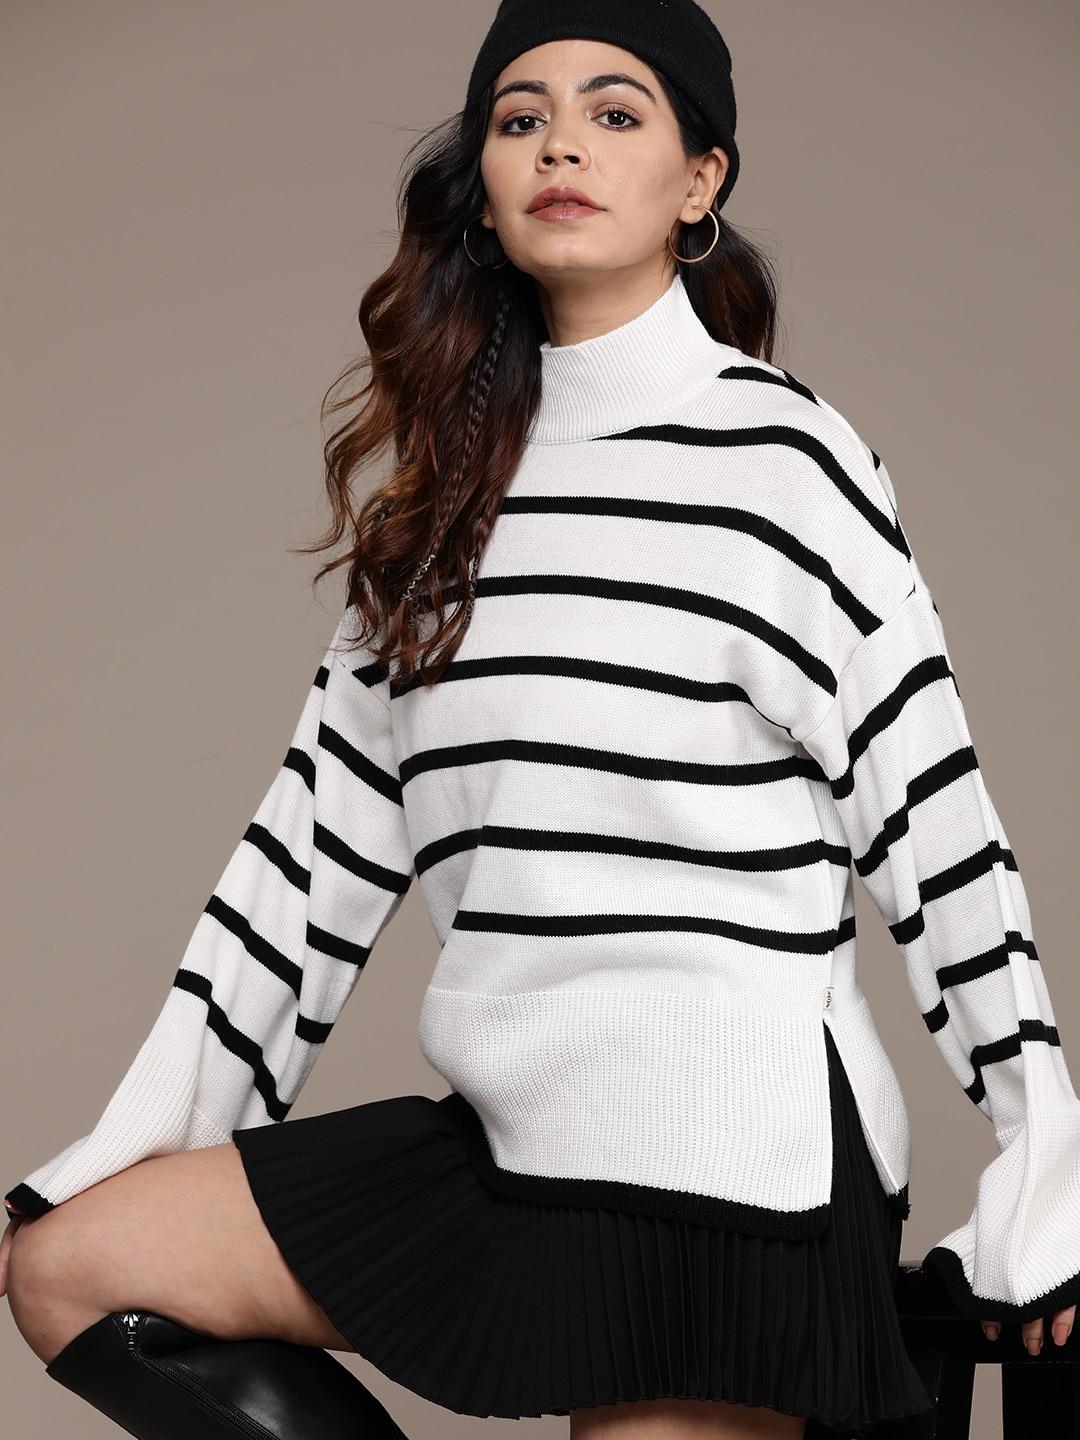 The Roadster Lifestyle Co. Flared Sleeves Striped Pullover